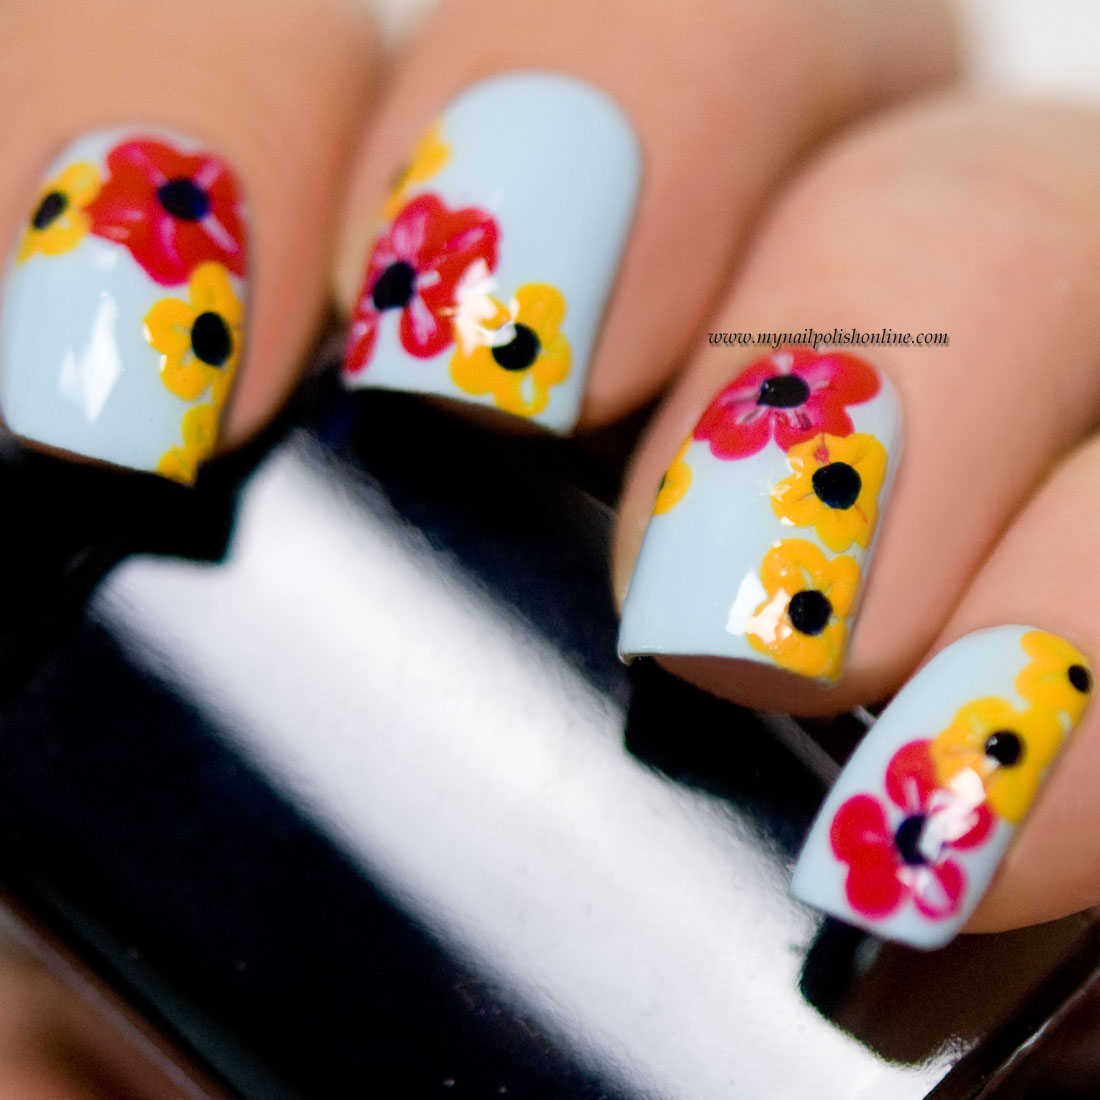 Nail art with flowers